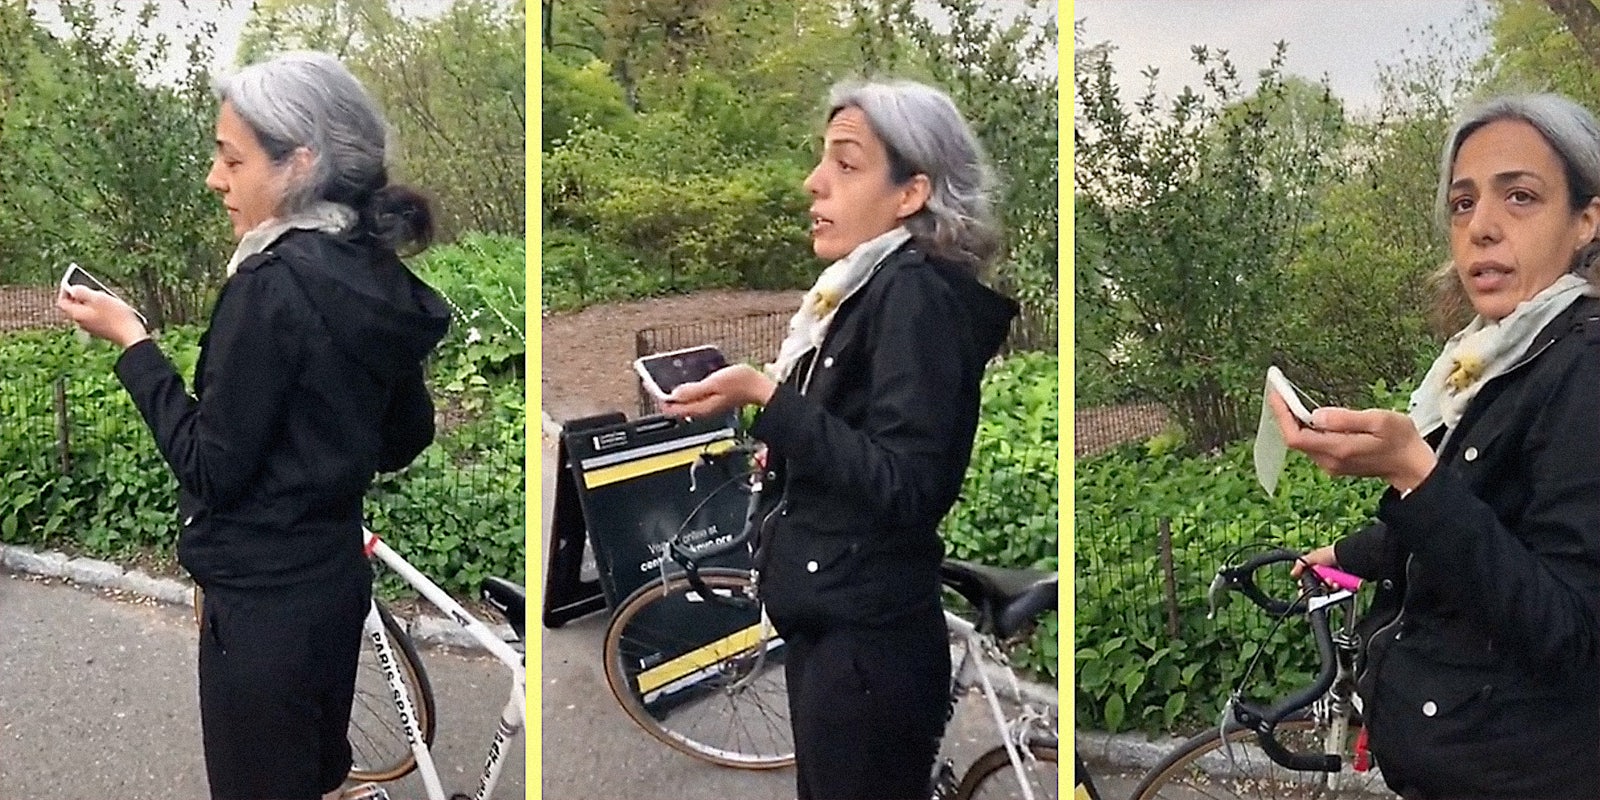 A woman with a phone and bicycle.